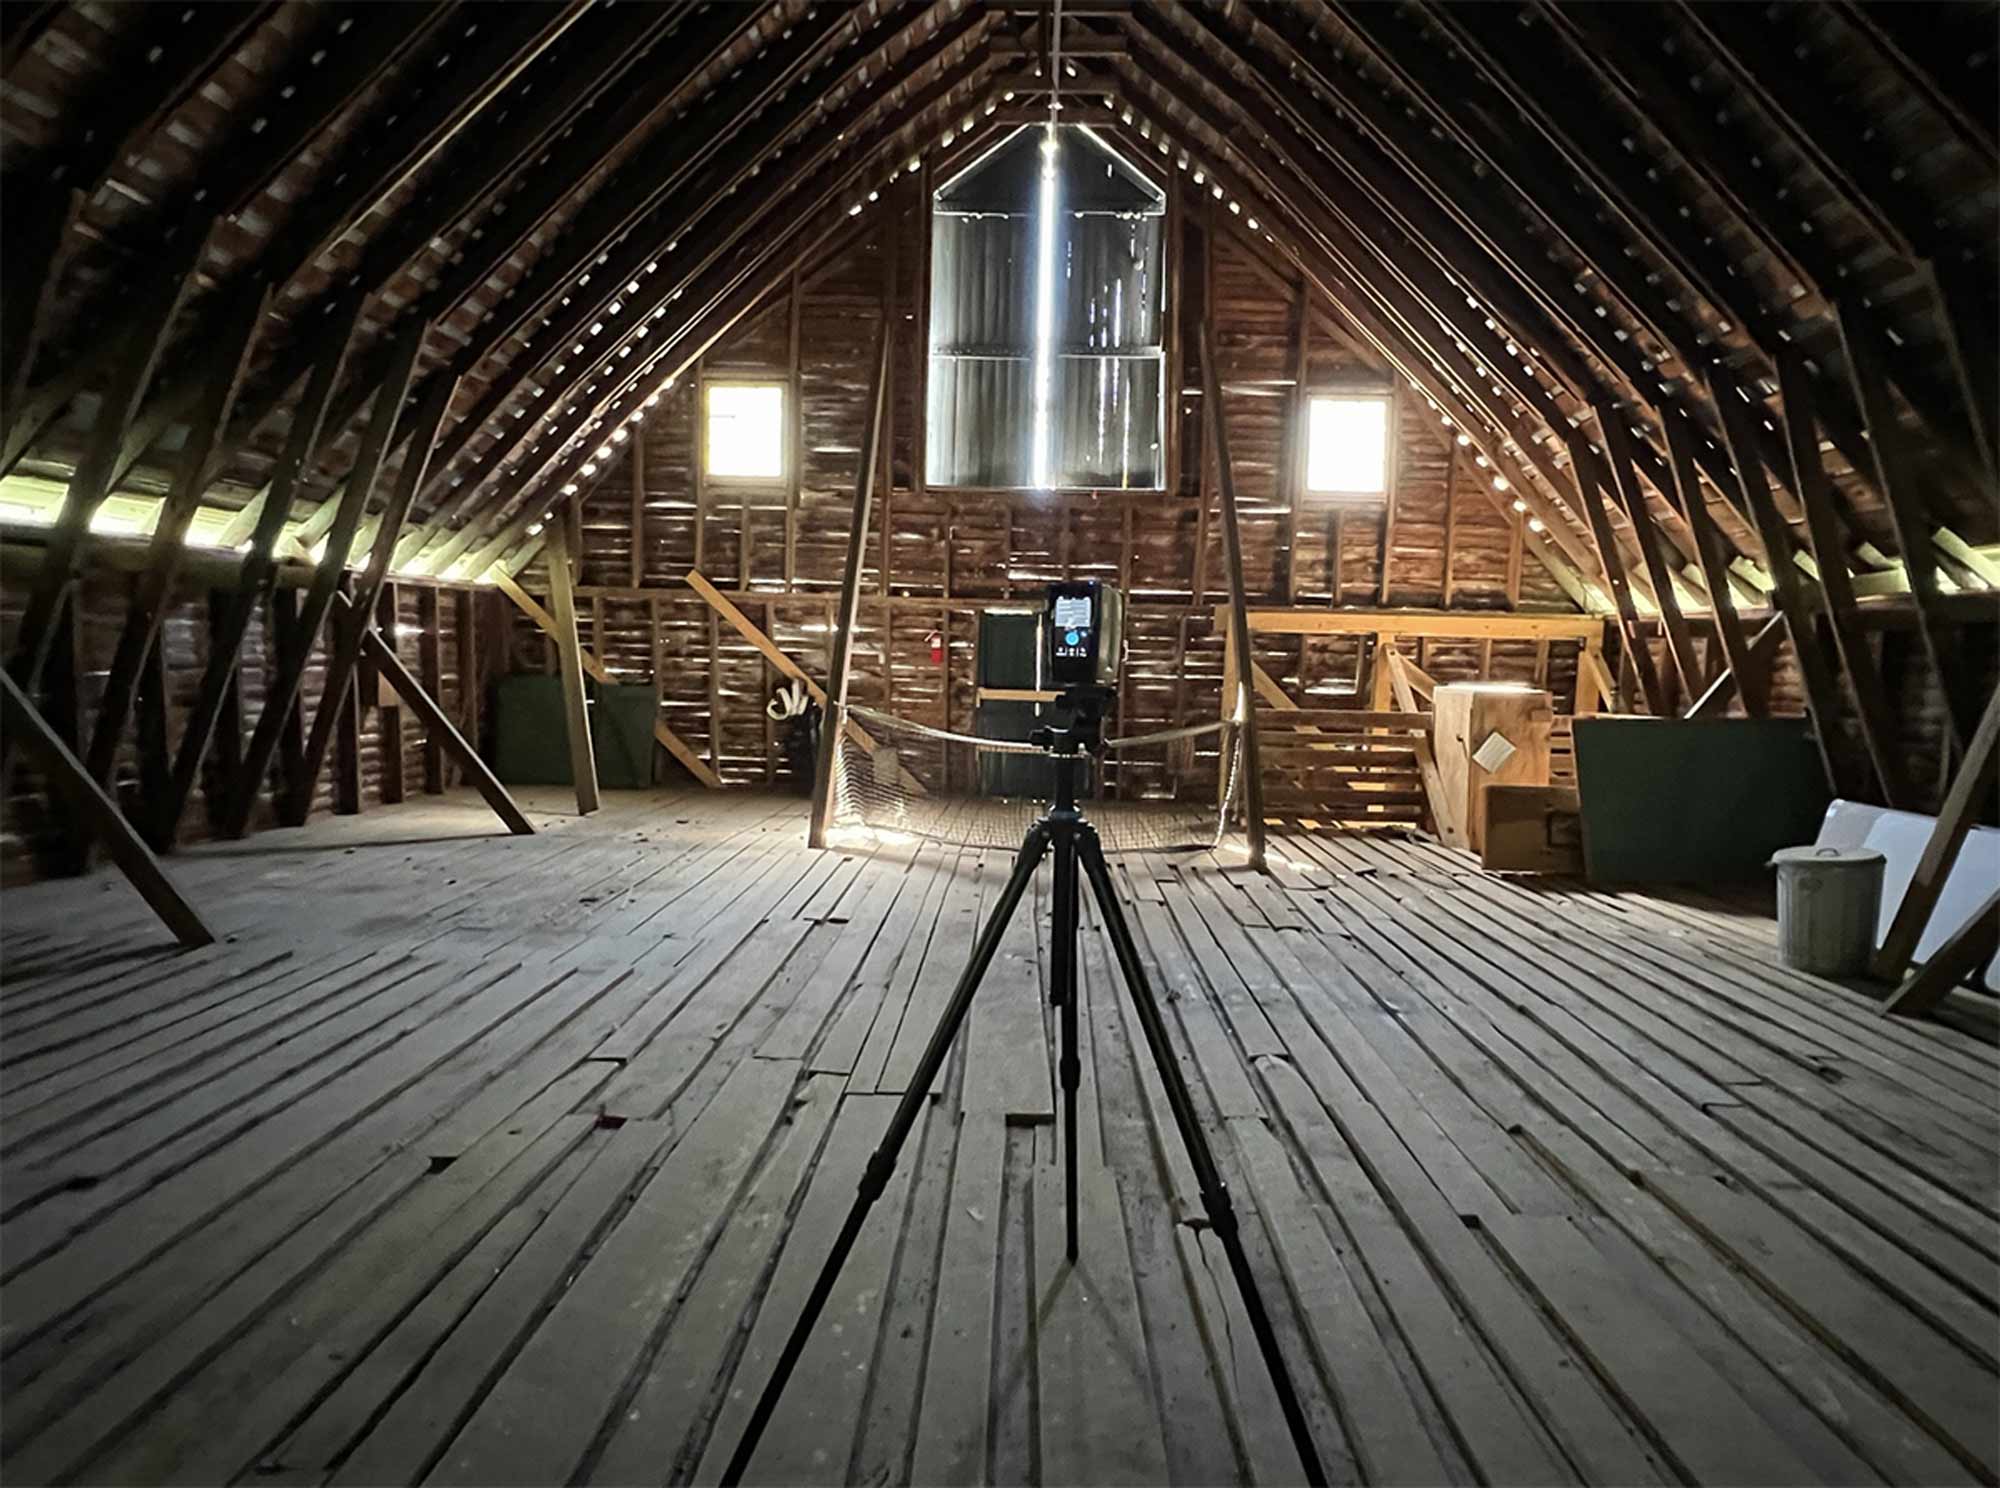 A scanner set up on a tripod in an upper level of the barn